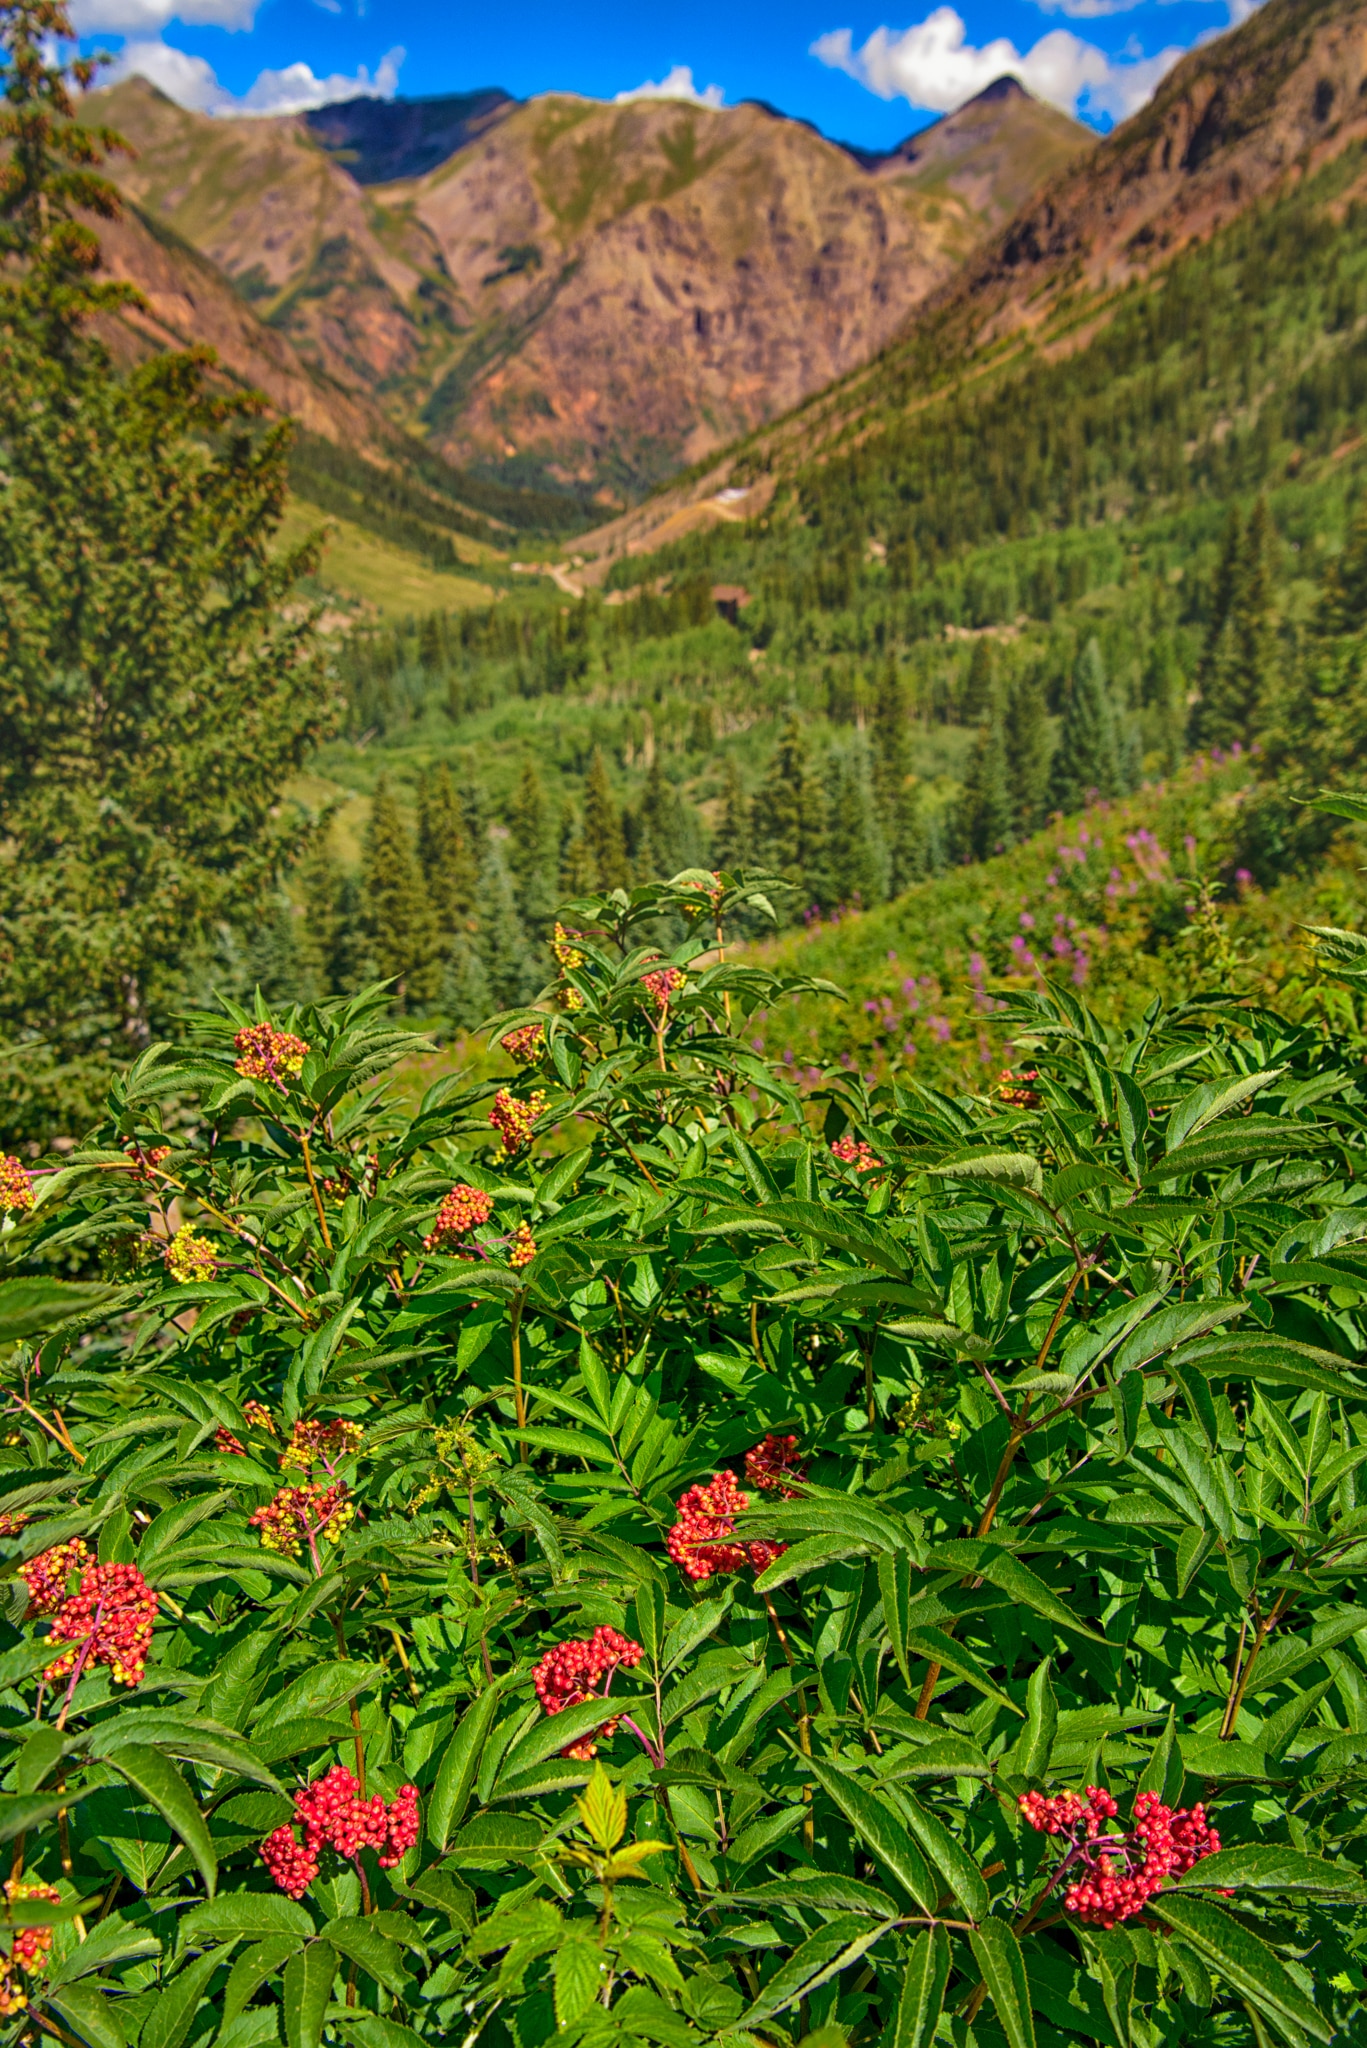 Scattered patches of Red-Berried Elder grow in the meadows along Stony Pass Road below treeline.